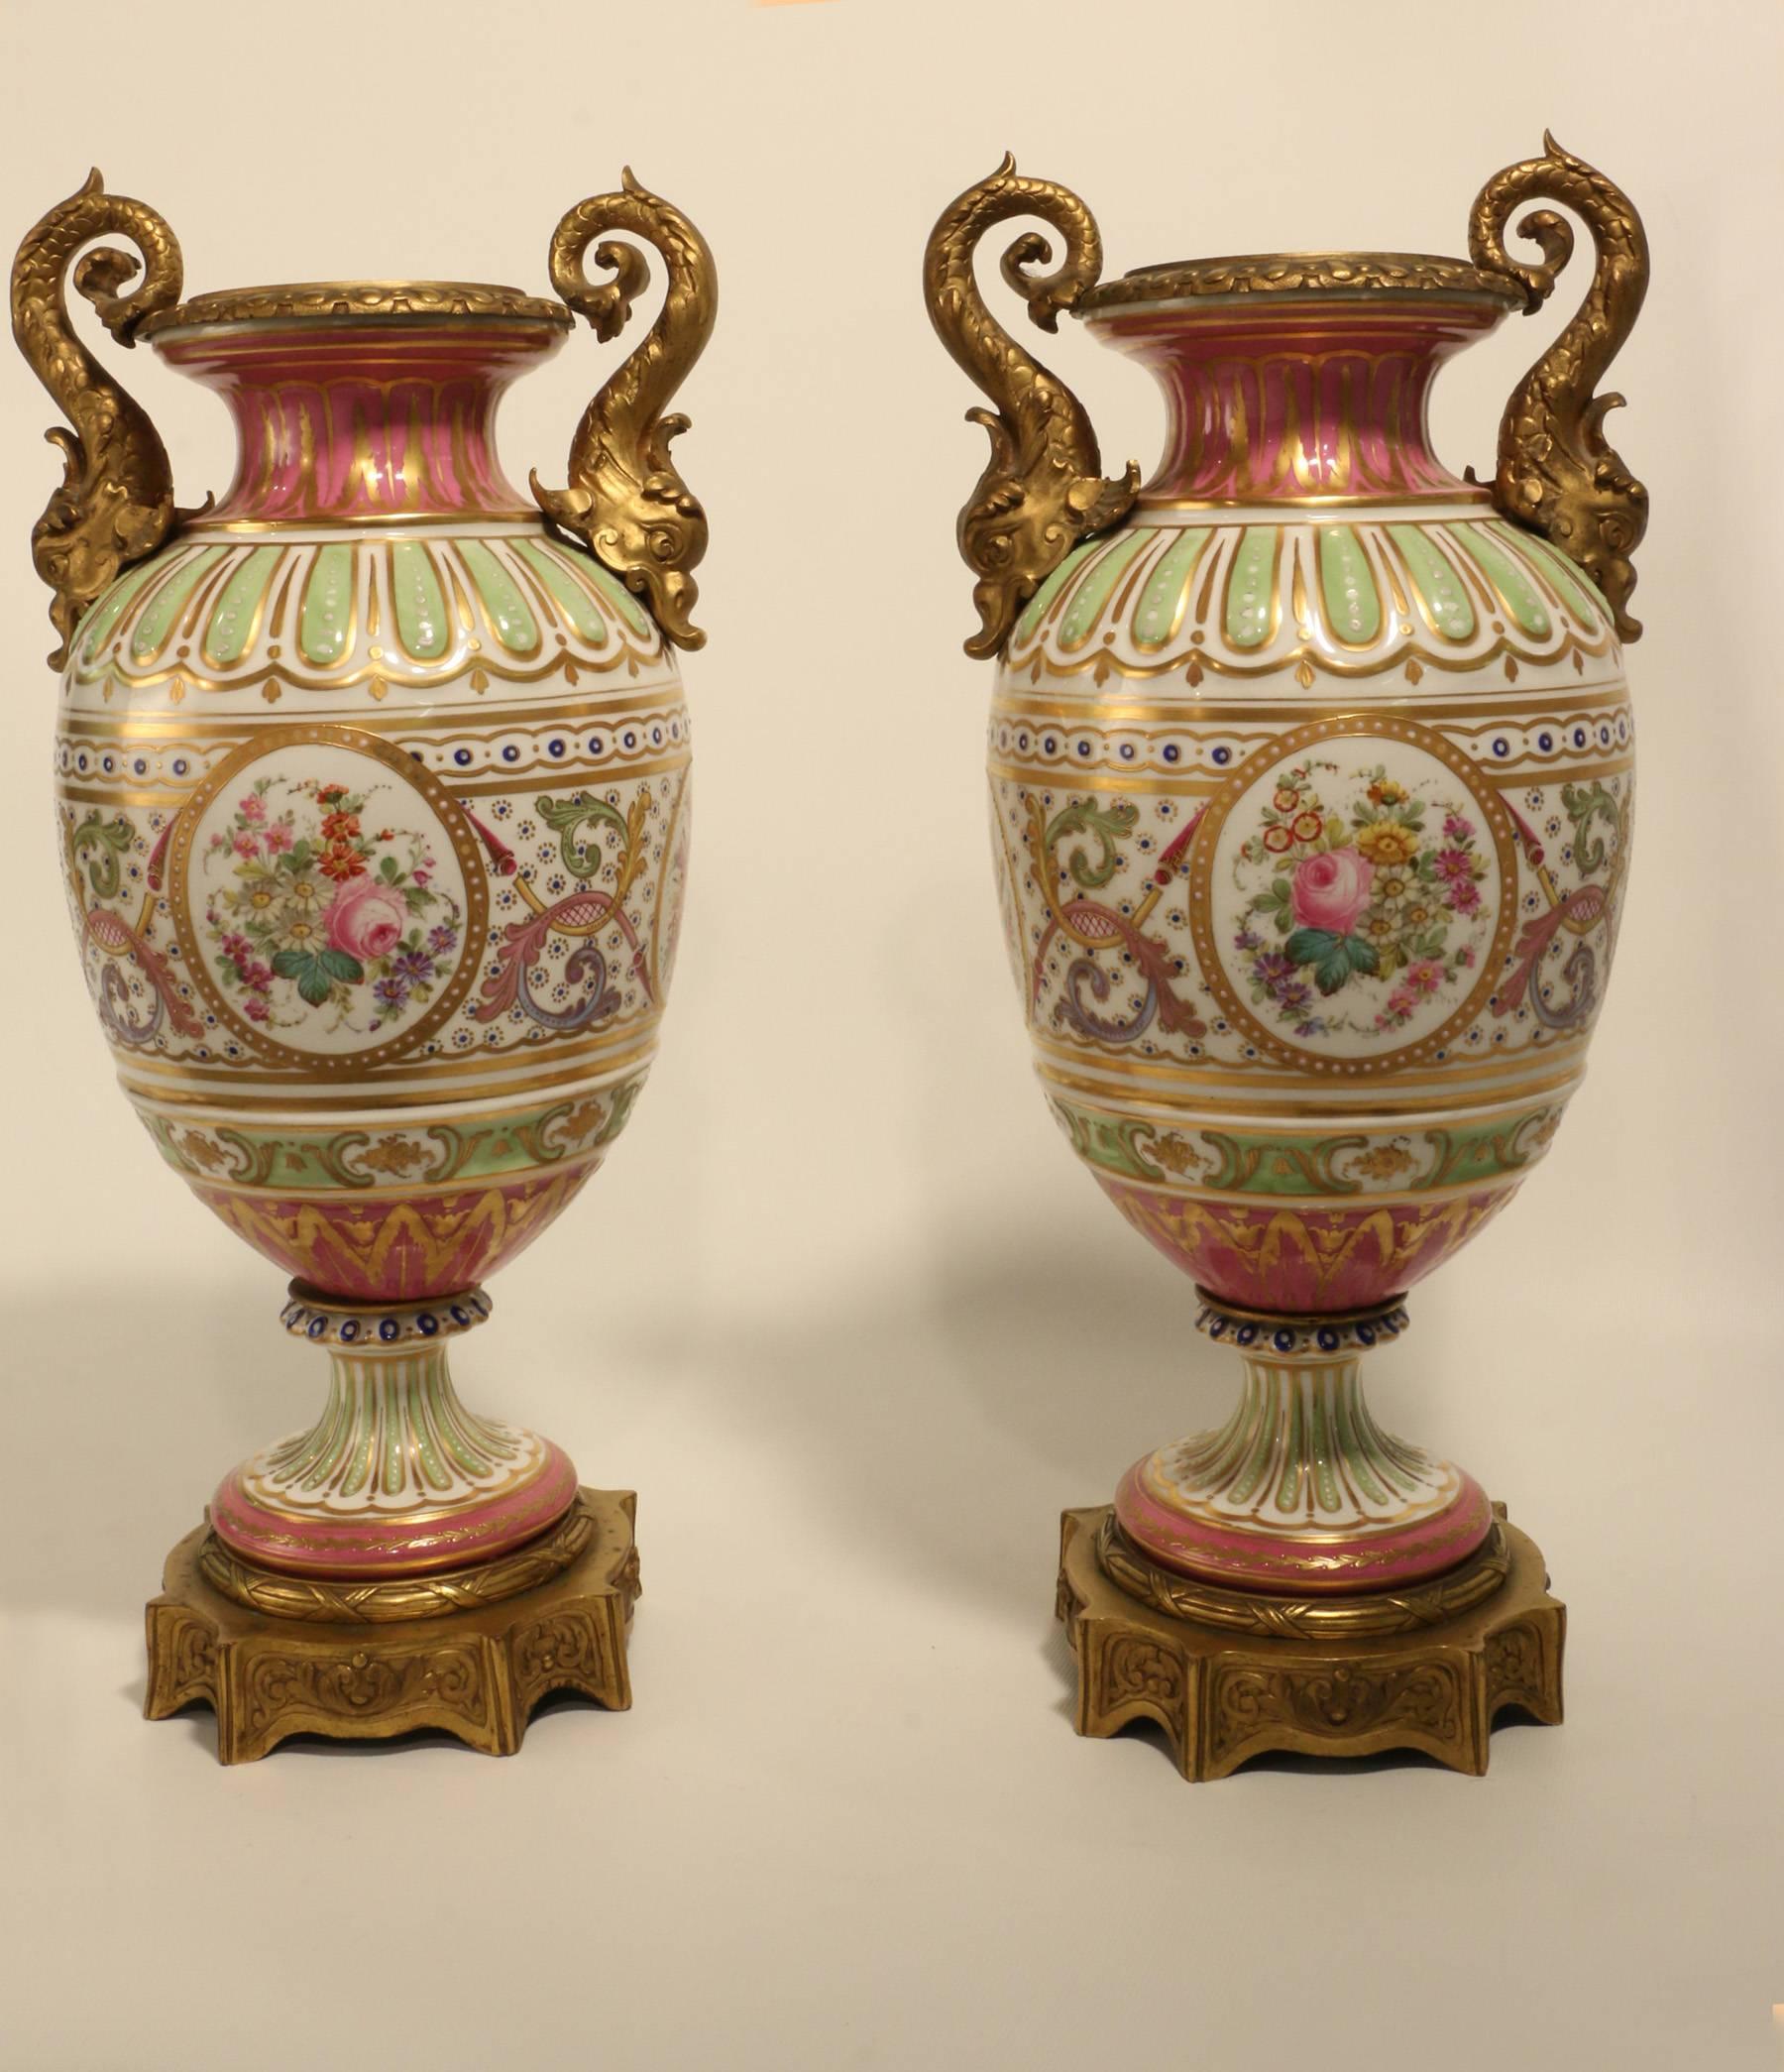 A pair of French Sevres style porcelain urns, each of baluster form, moulded and painted in pompadour pink and eau de nil and gilt, on a white ground. Each is painted with alternating jeweled oval panels of floral and musical trophies amid stylised